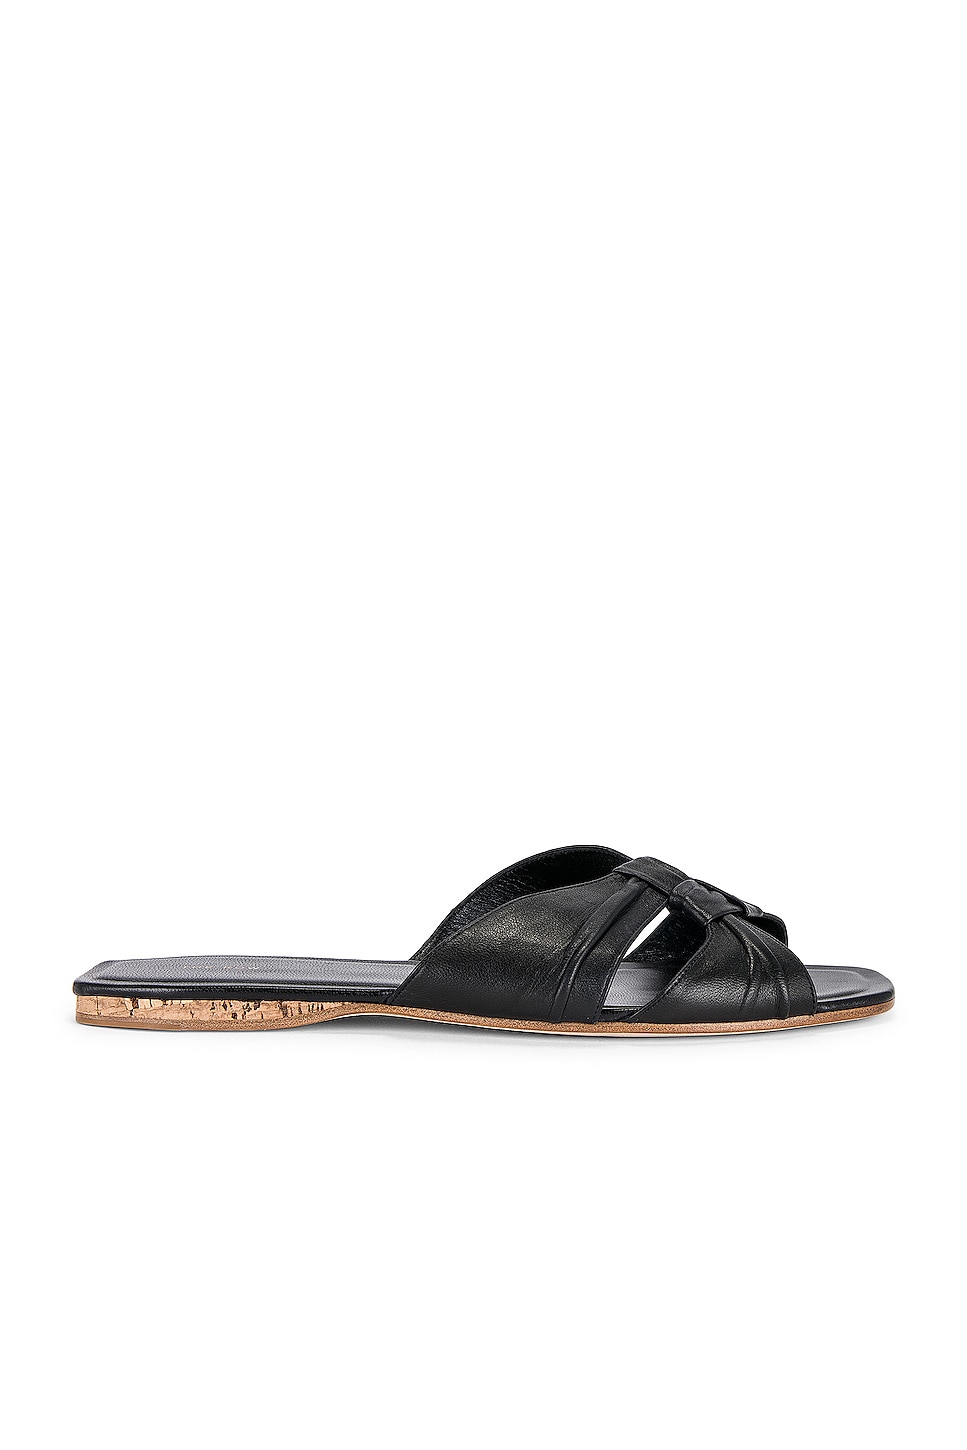 Image 1 of The Row Soft Knot Flat Sandal in Black & Cork